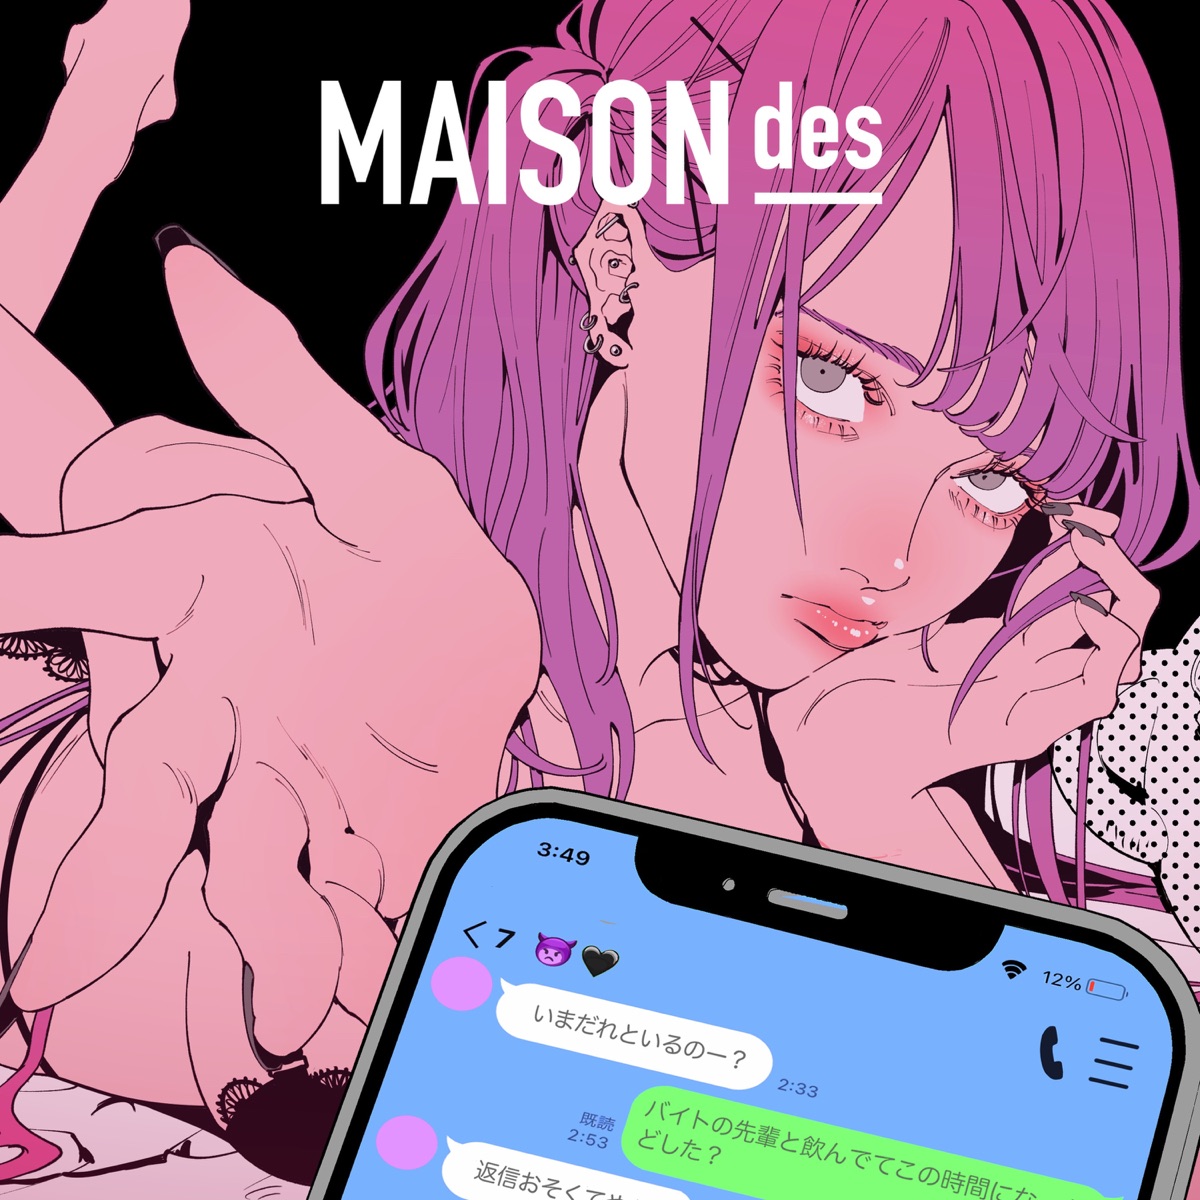 Cover art for『MAISONdes - けーたいみしてよ feat. はしメロ & maeshima soshi』from the release『Show Me Your Phone (feat. Hashimero & maeshima soshi)